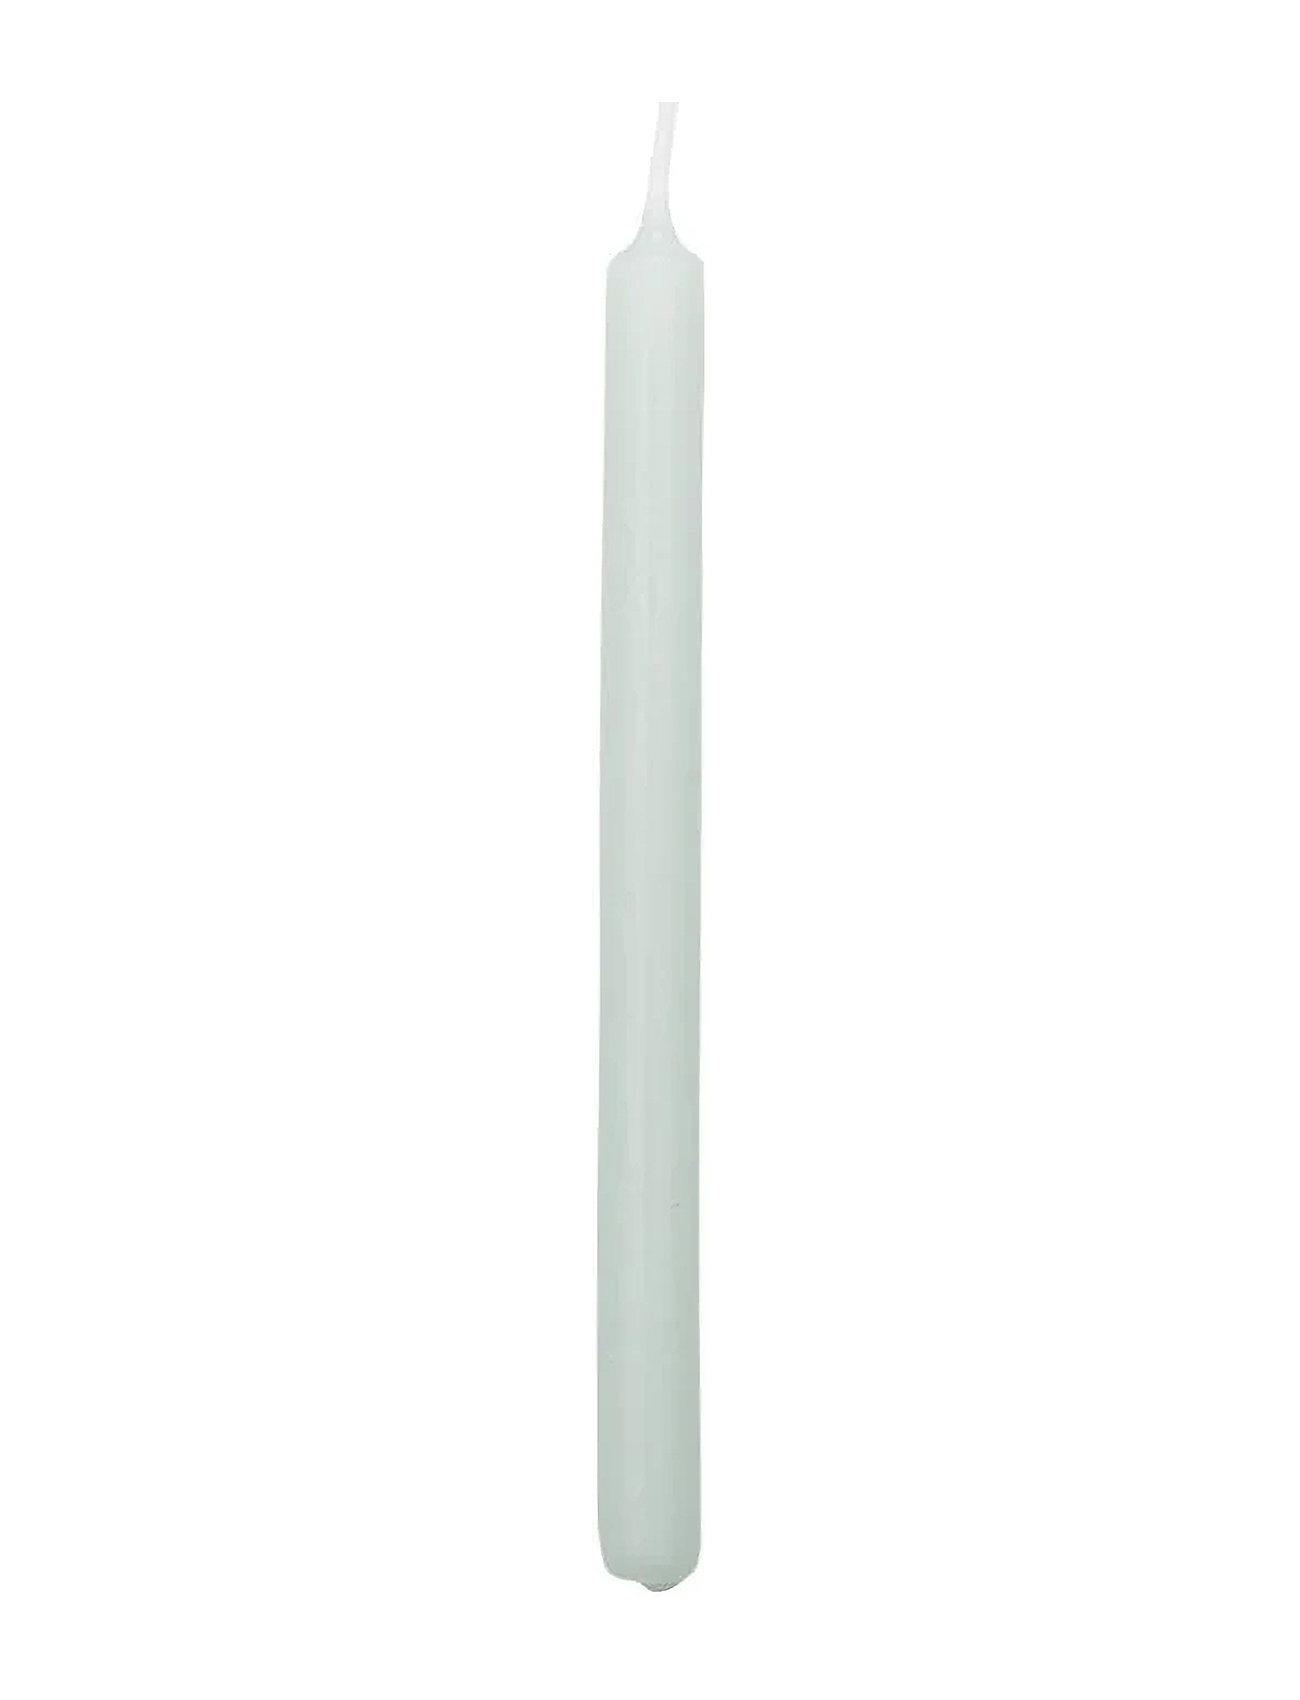 Basic Small Taper Candle H16.5 Cm. Home Decoration Candles Pillar Candles Green Lene Bjerre